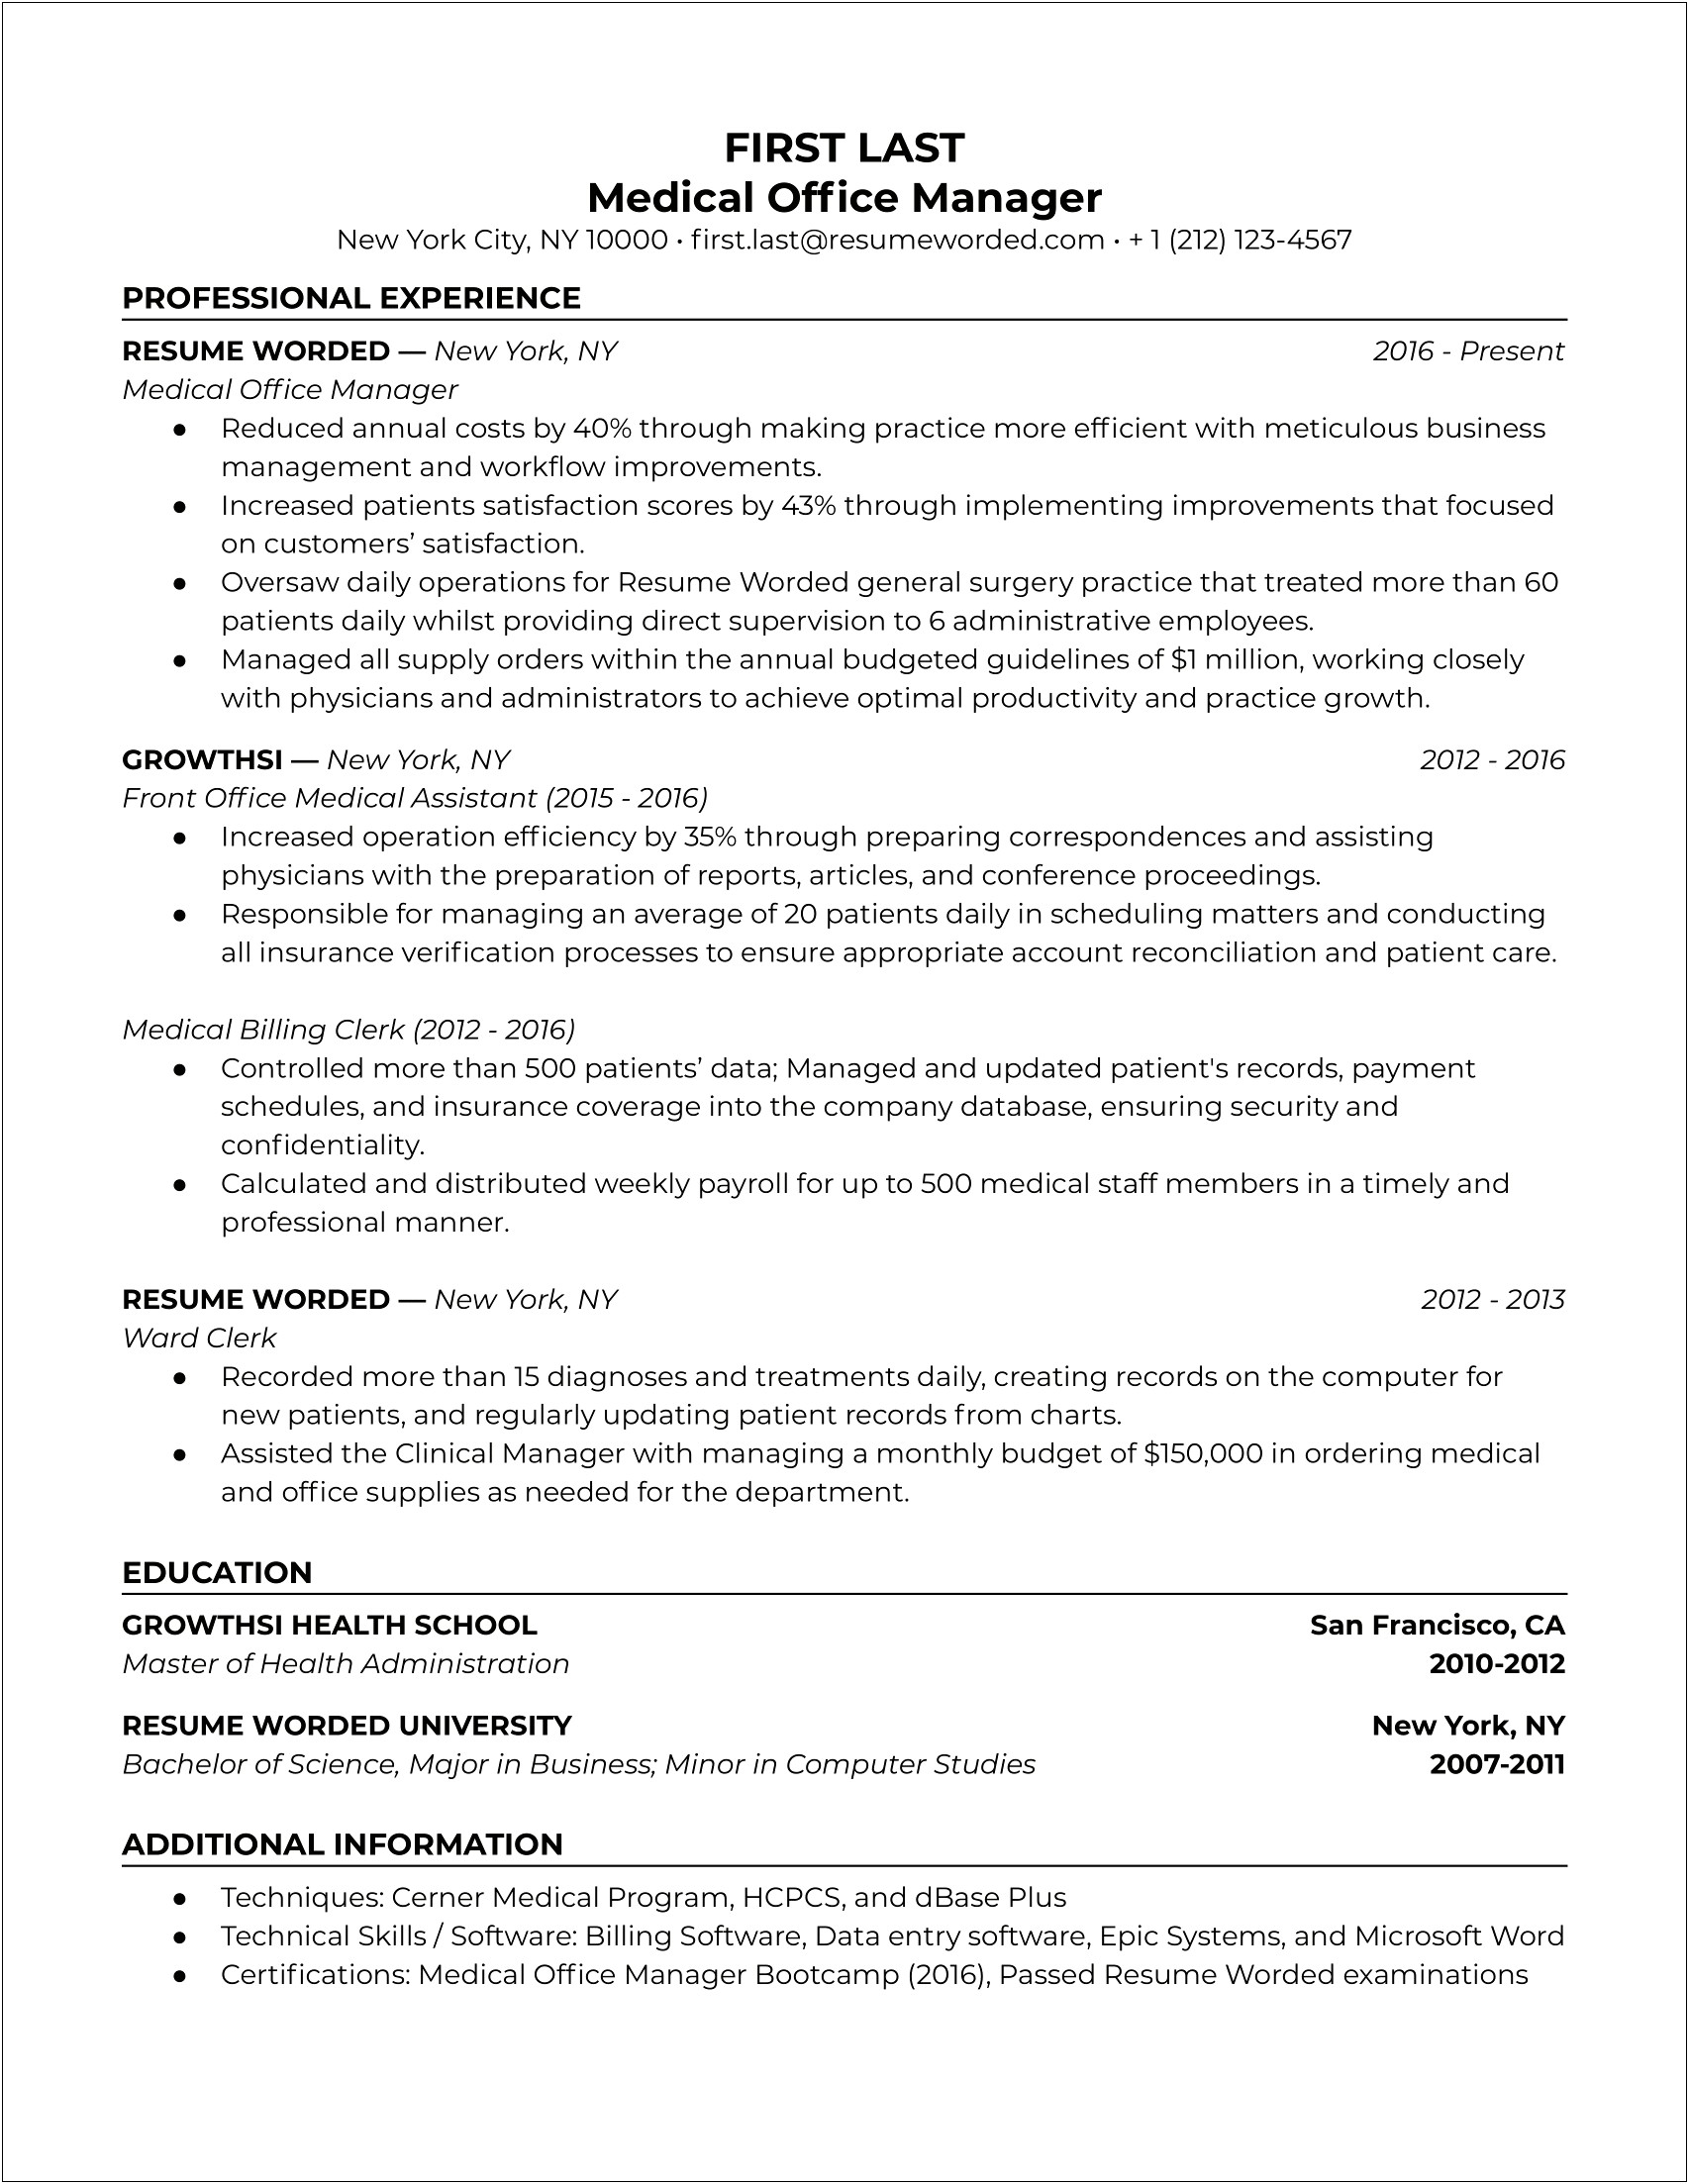 Hotel Conference Services Manager Resume